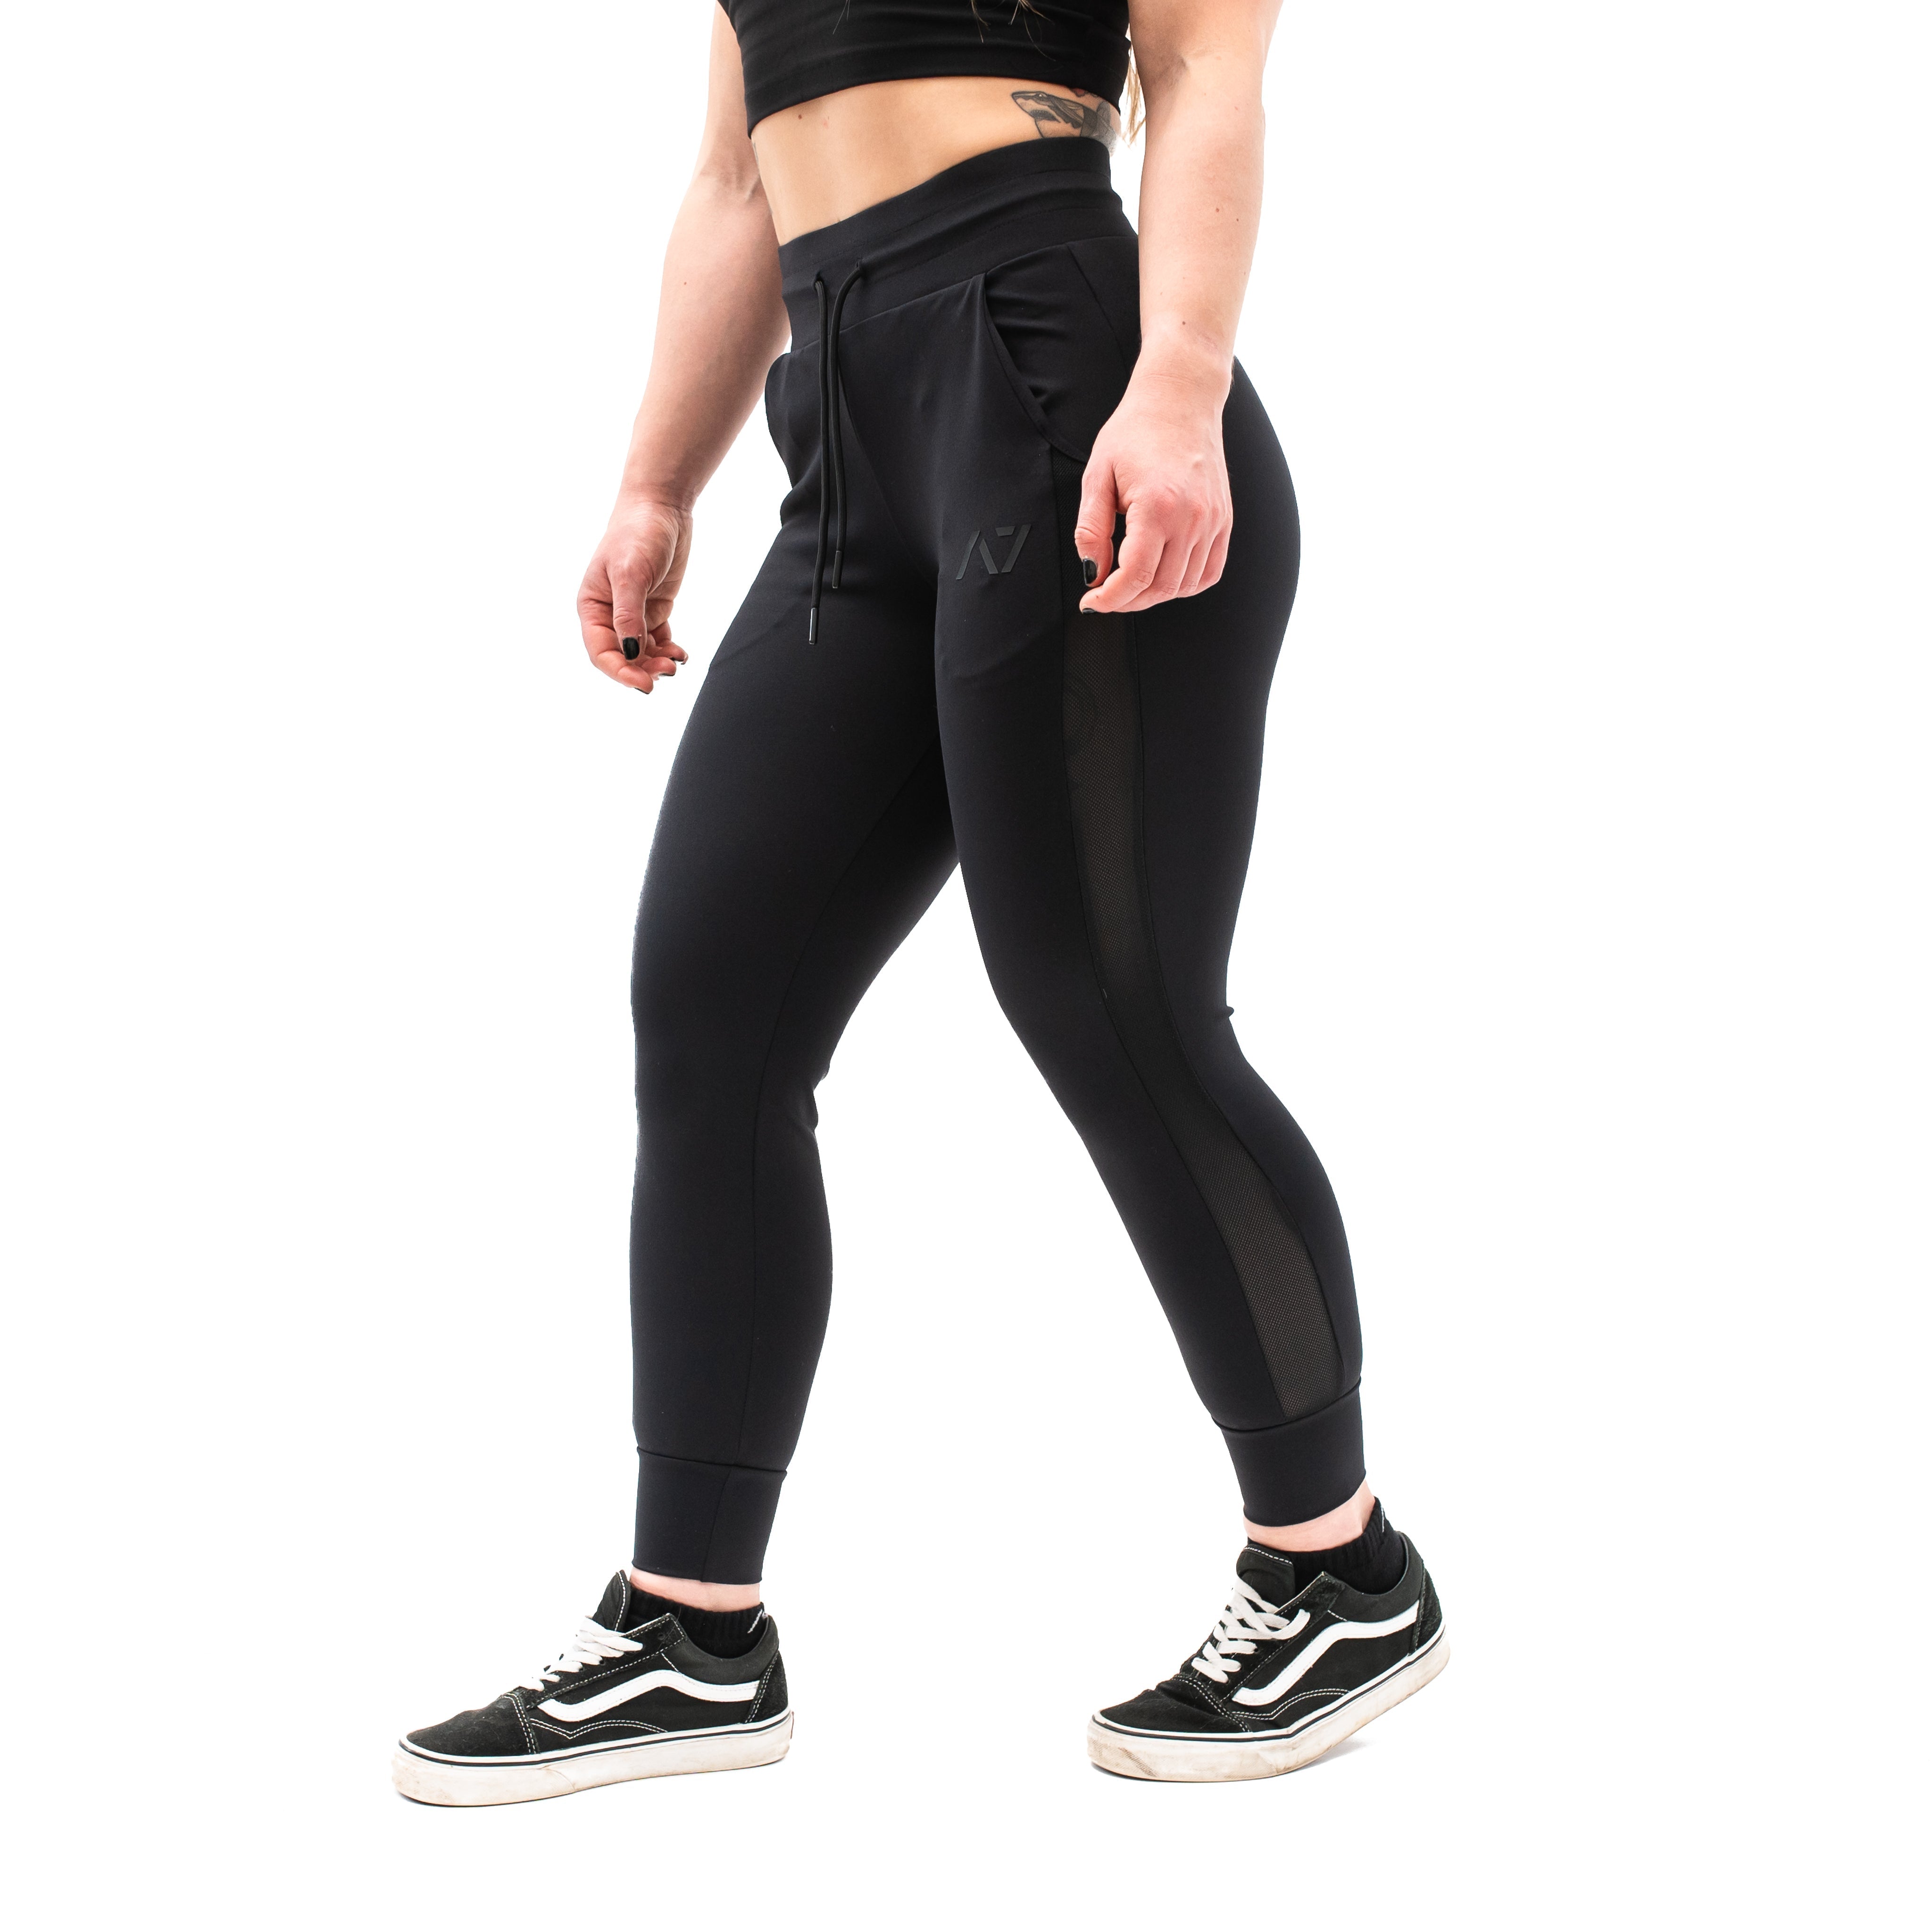 A7’s newest Women's Joggers are made with the same premium Defy fabric you have come to love, but with female curves (flexure) in mind! Using 4-way-stretch material, these flexure joggers are specifically designed for Women's unique shape. Flexure women’s joggers in night are available to buy from A7UK for shipping to UK and Europe. 